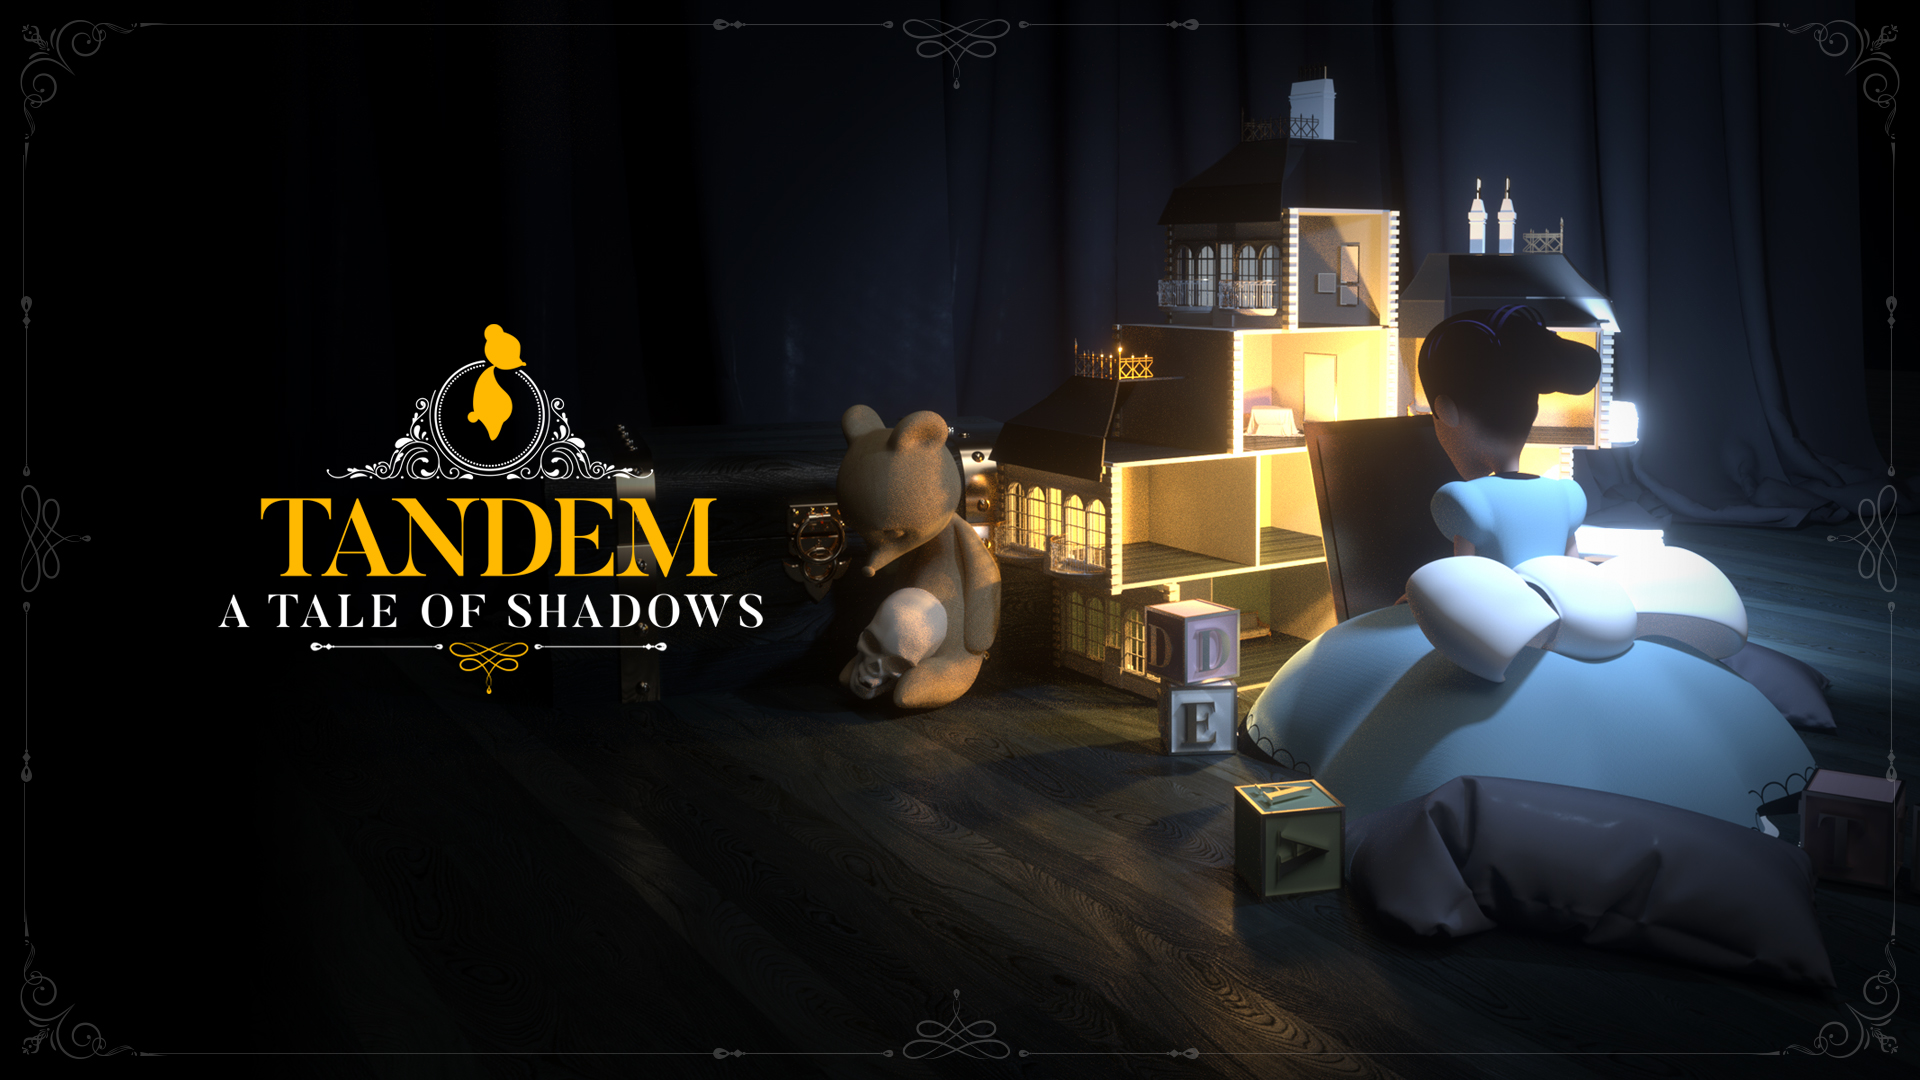 tandem-a-tale-of-shadows-reveals-the-daring-duo-of-its-character